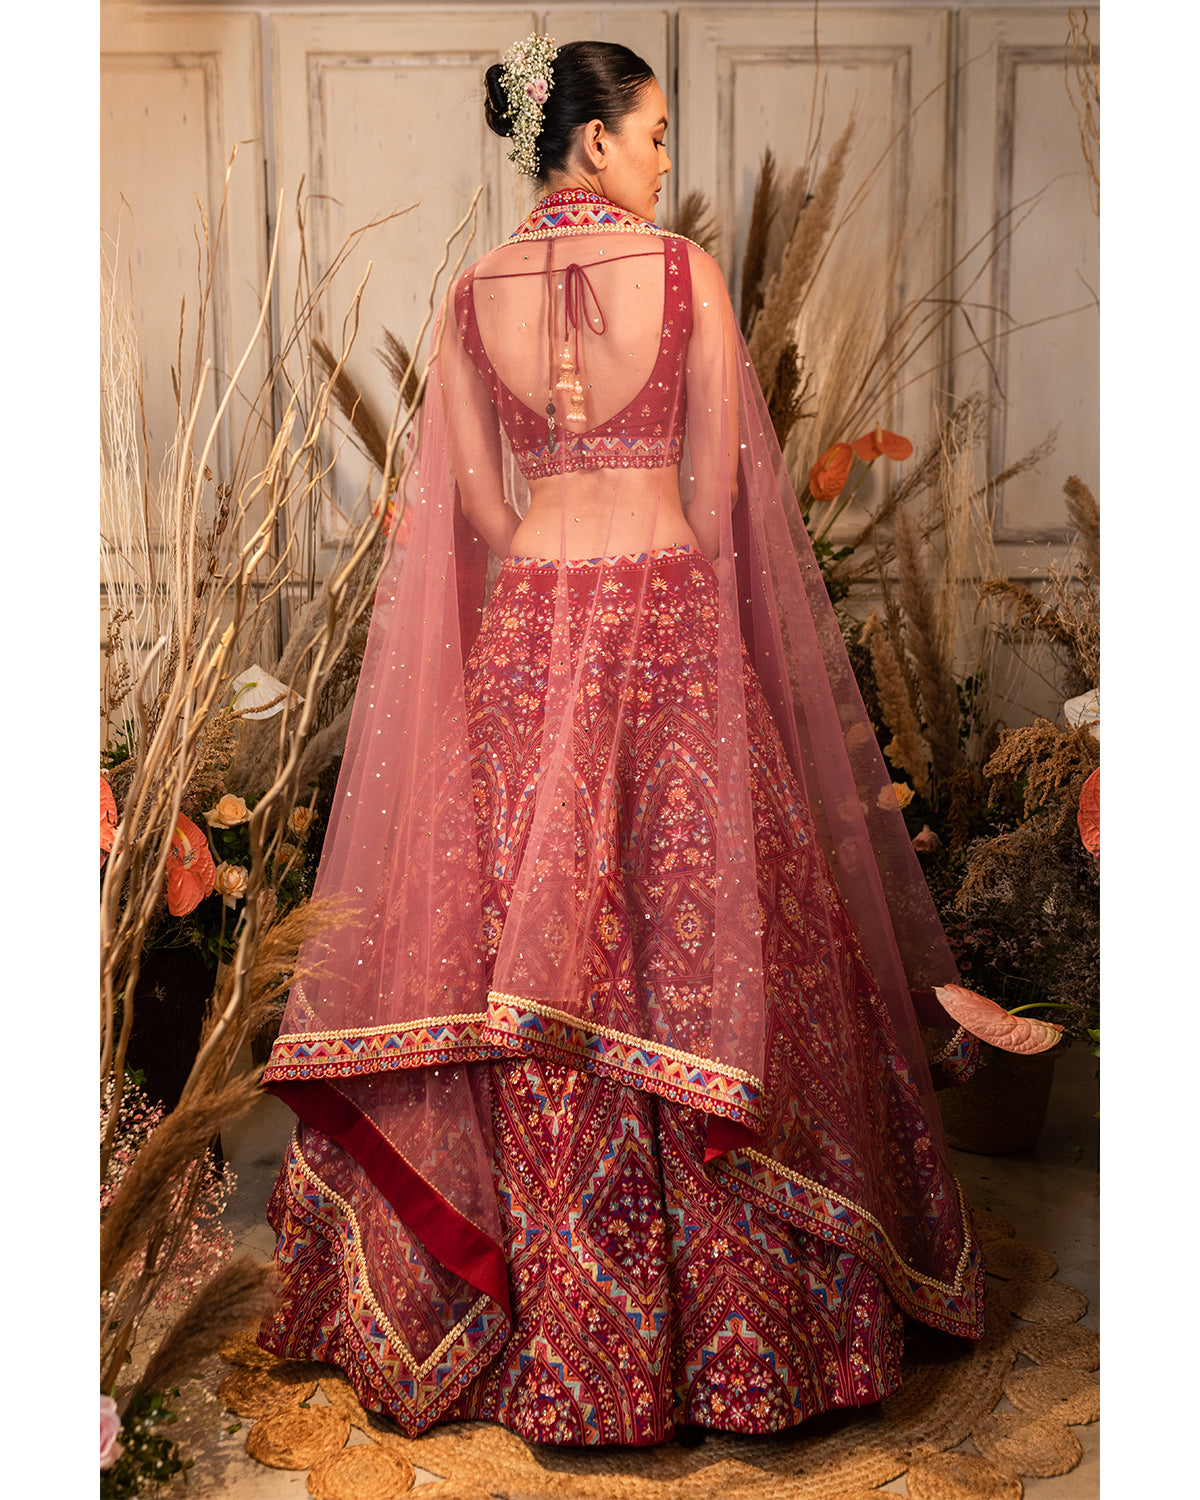 Indian Cloth Store Reviews - 254 Reviews of Indianclothstore.com |  Sitejabber